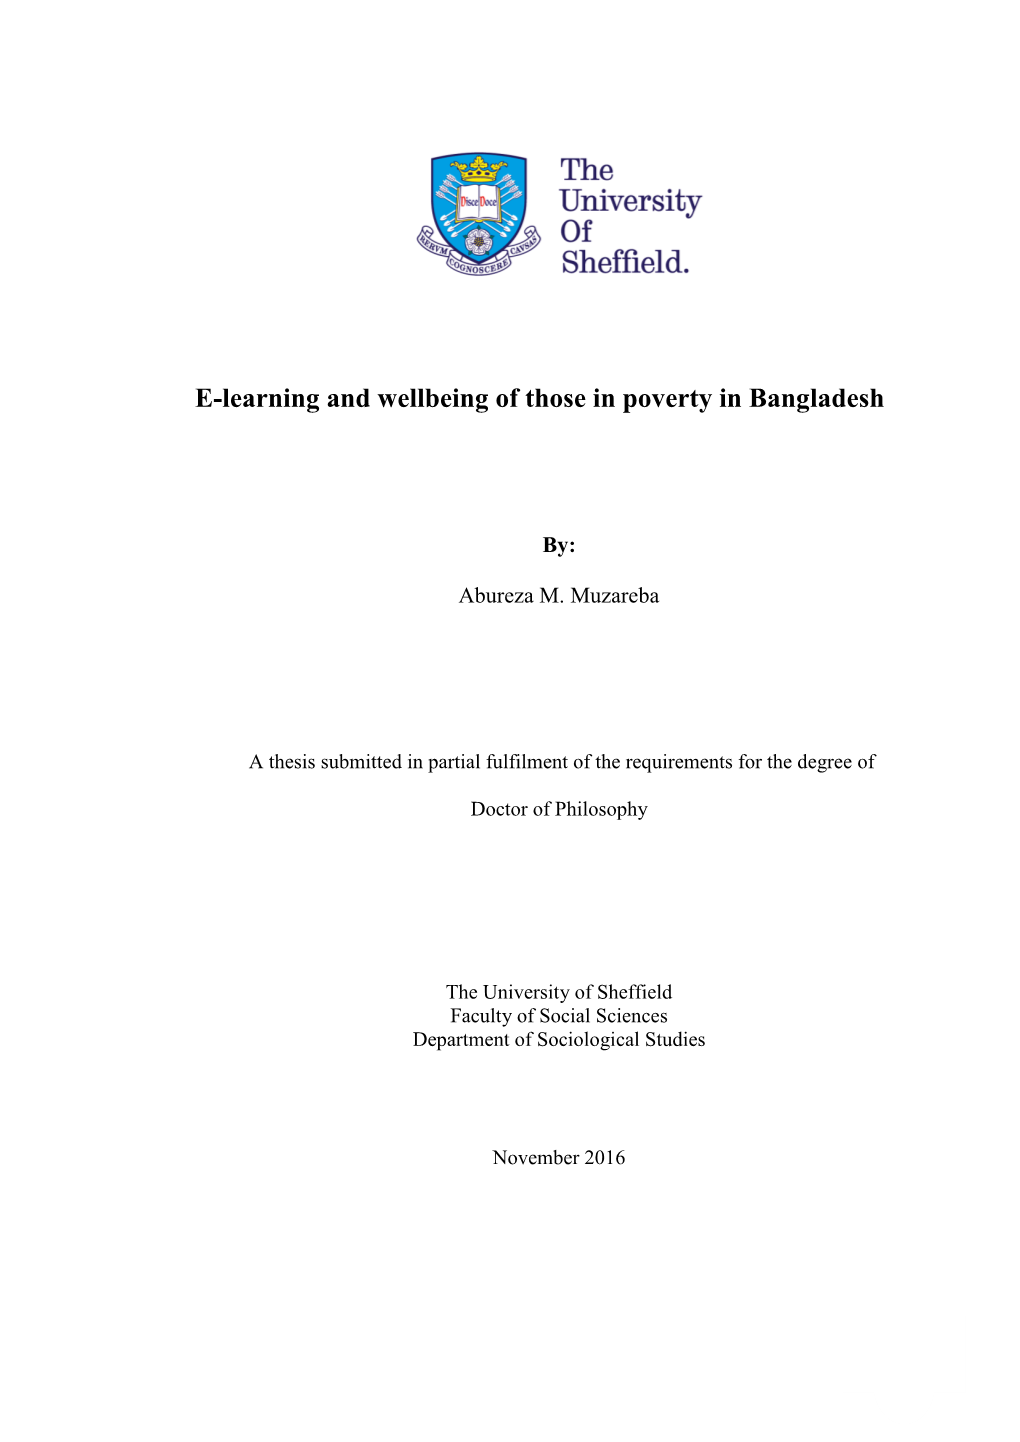 E-Learning and Wellbeing of Those in Poverty in Bangladesh